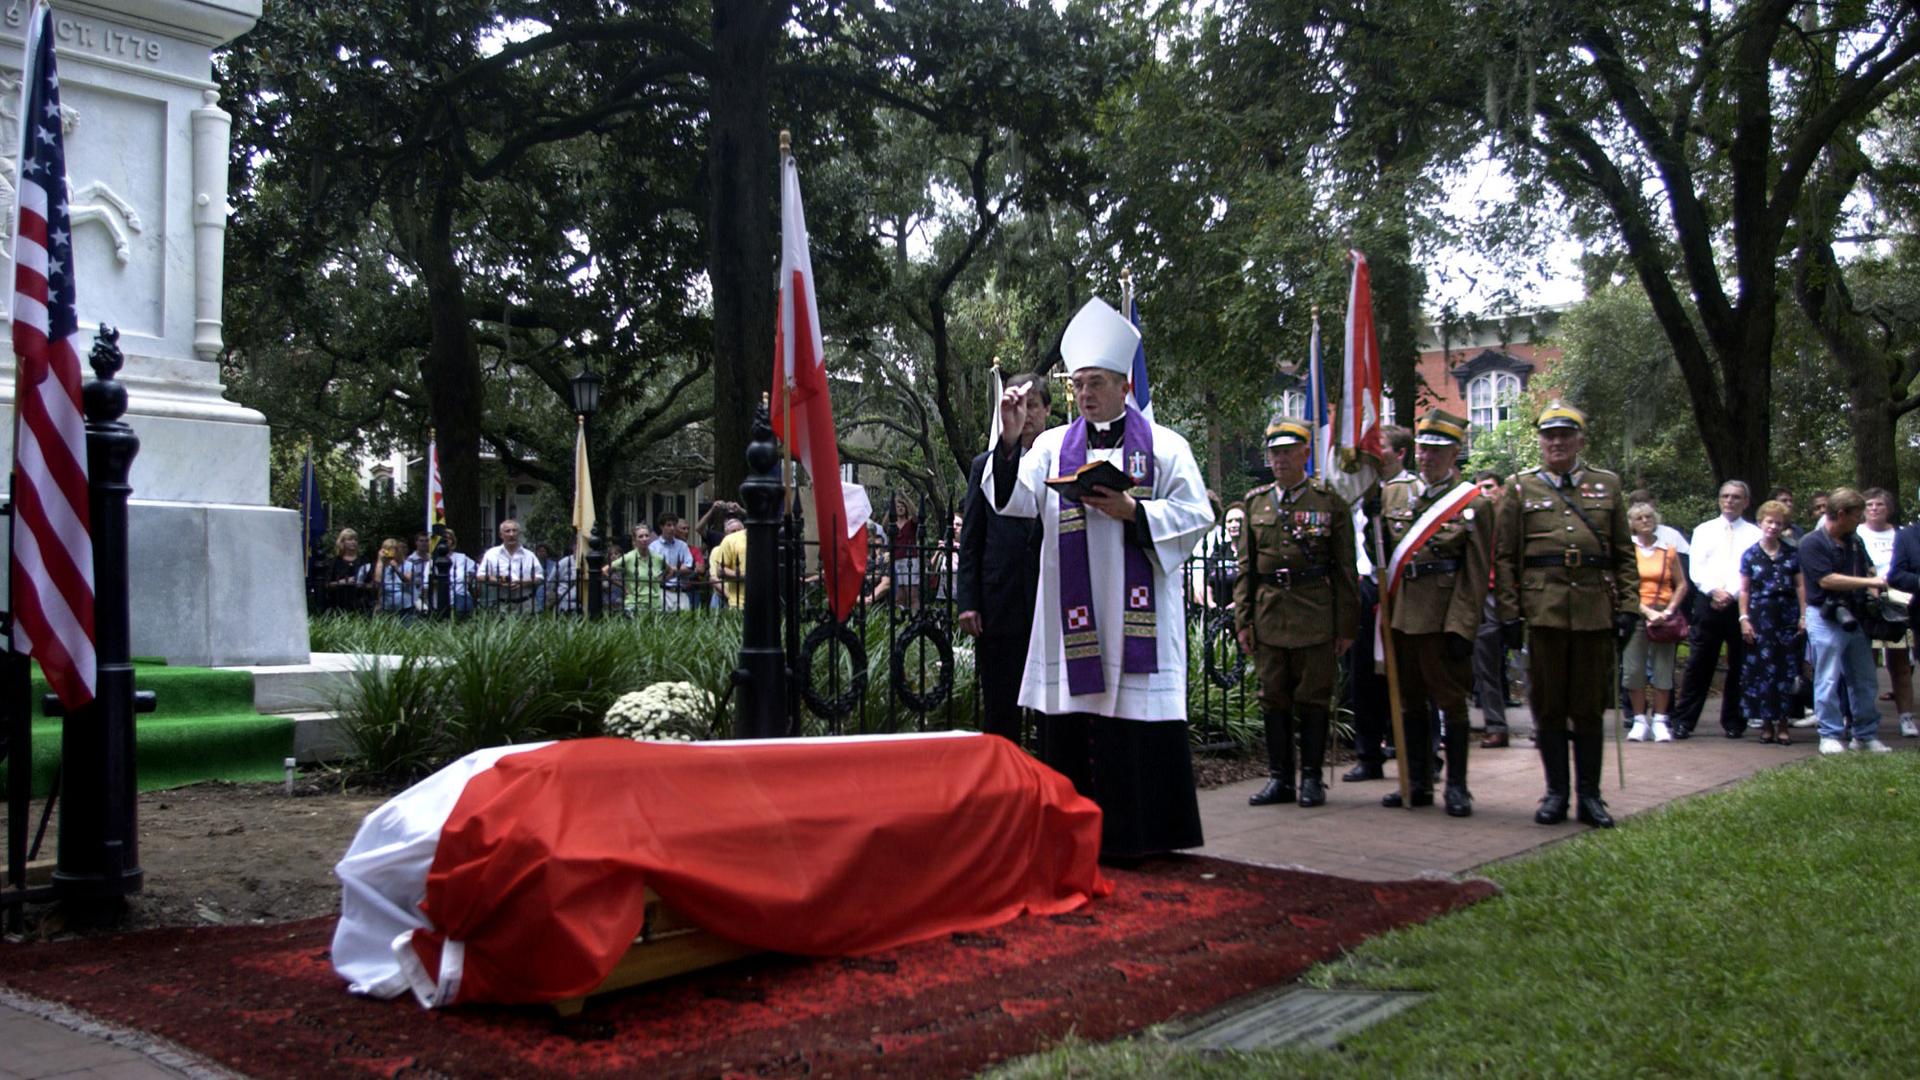 A bishop sprinkles holy water on a coffin covered in the Polish flag